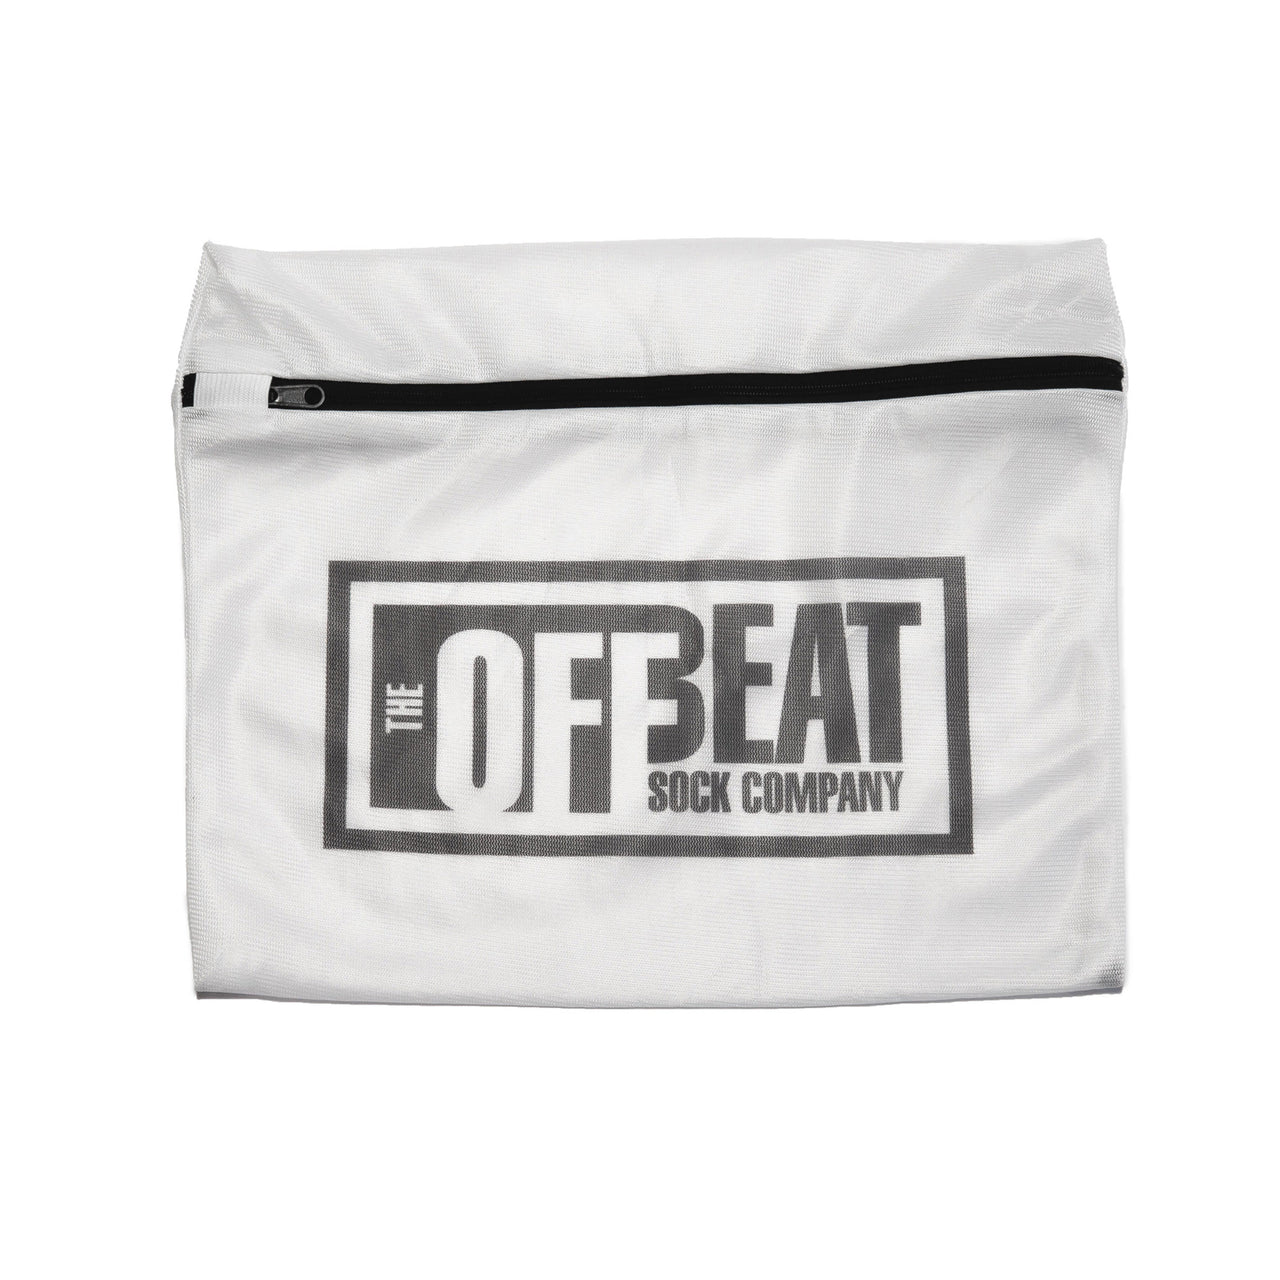 The Official Offbeat Socks Wash Bag